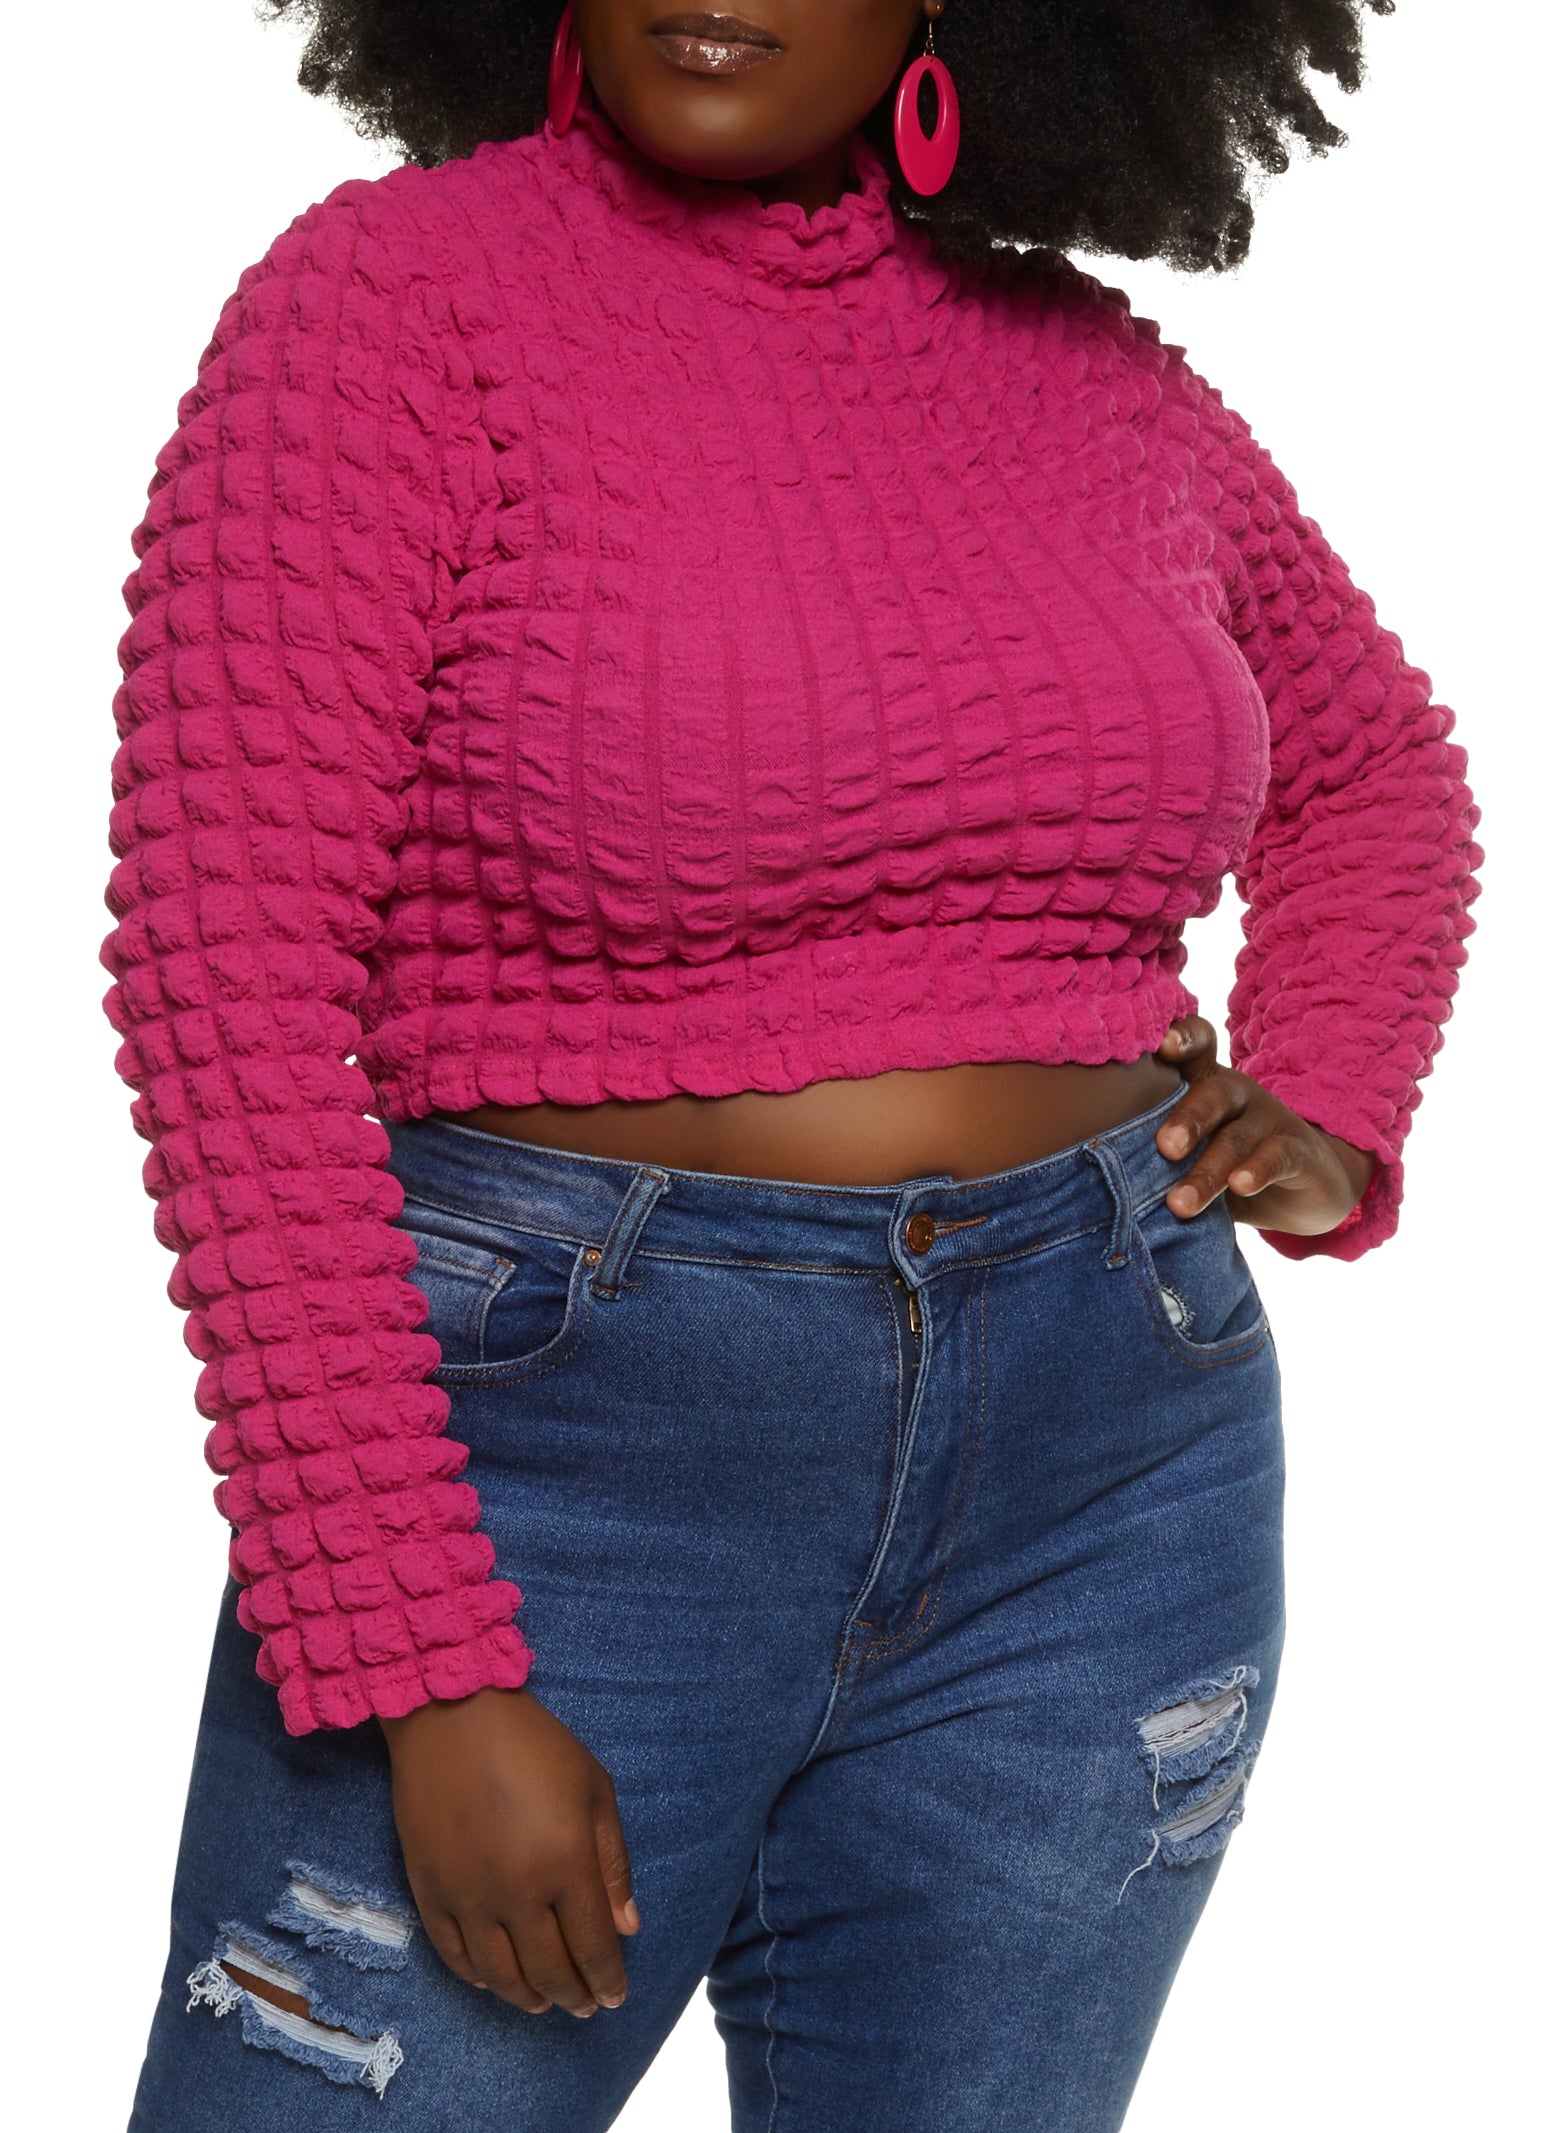 $5 Sale on Plus Size Clothing, Everyday Low Prices